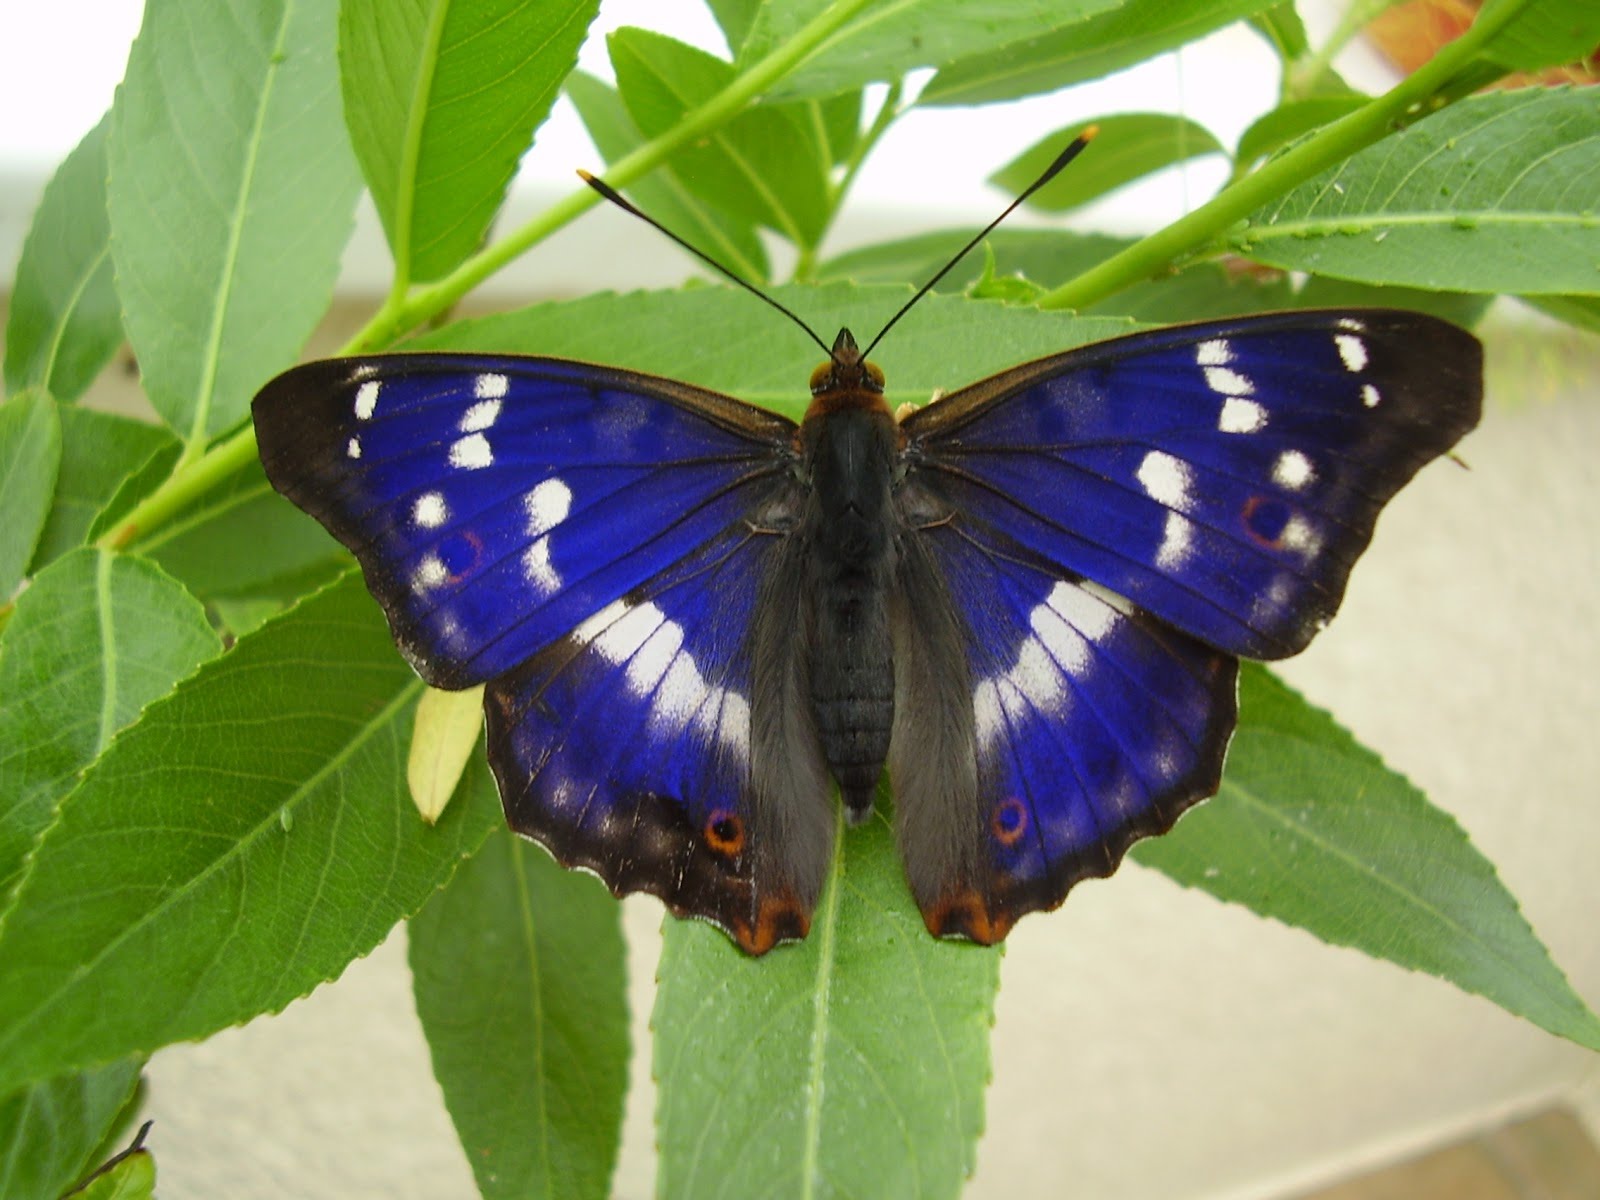 Planting for the Purple Emperor